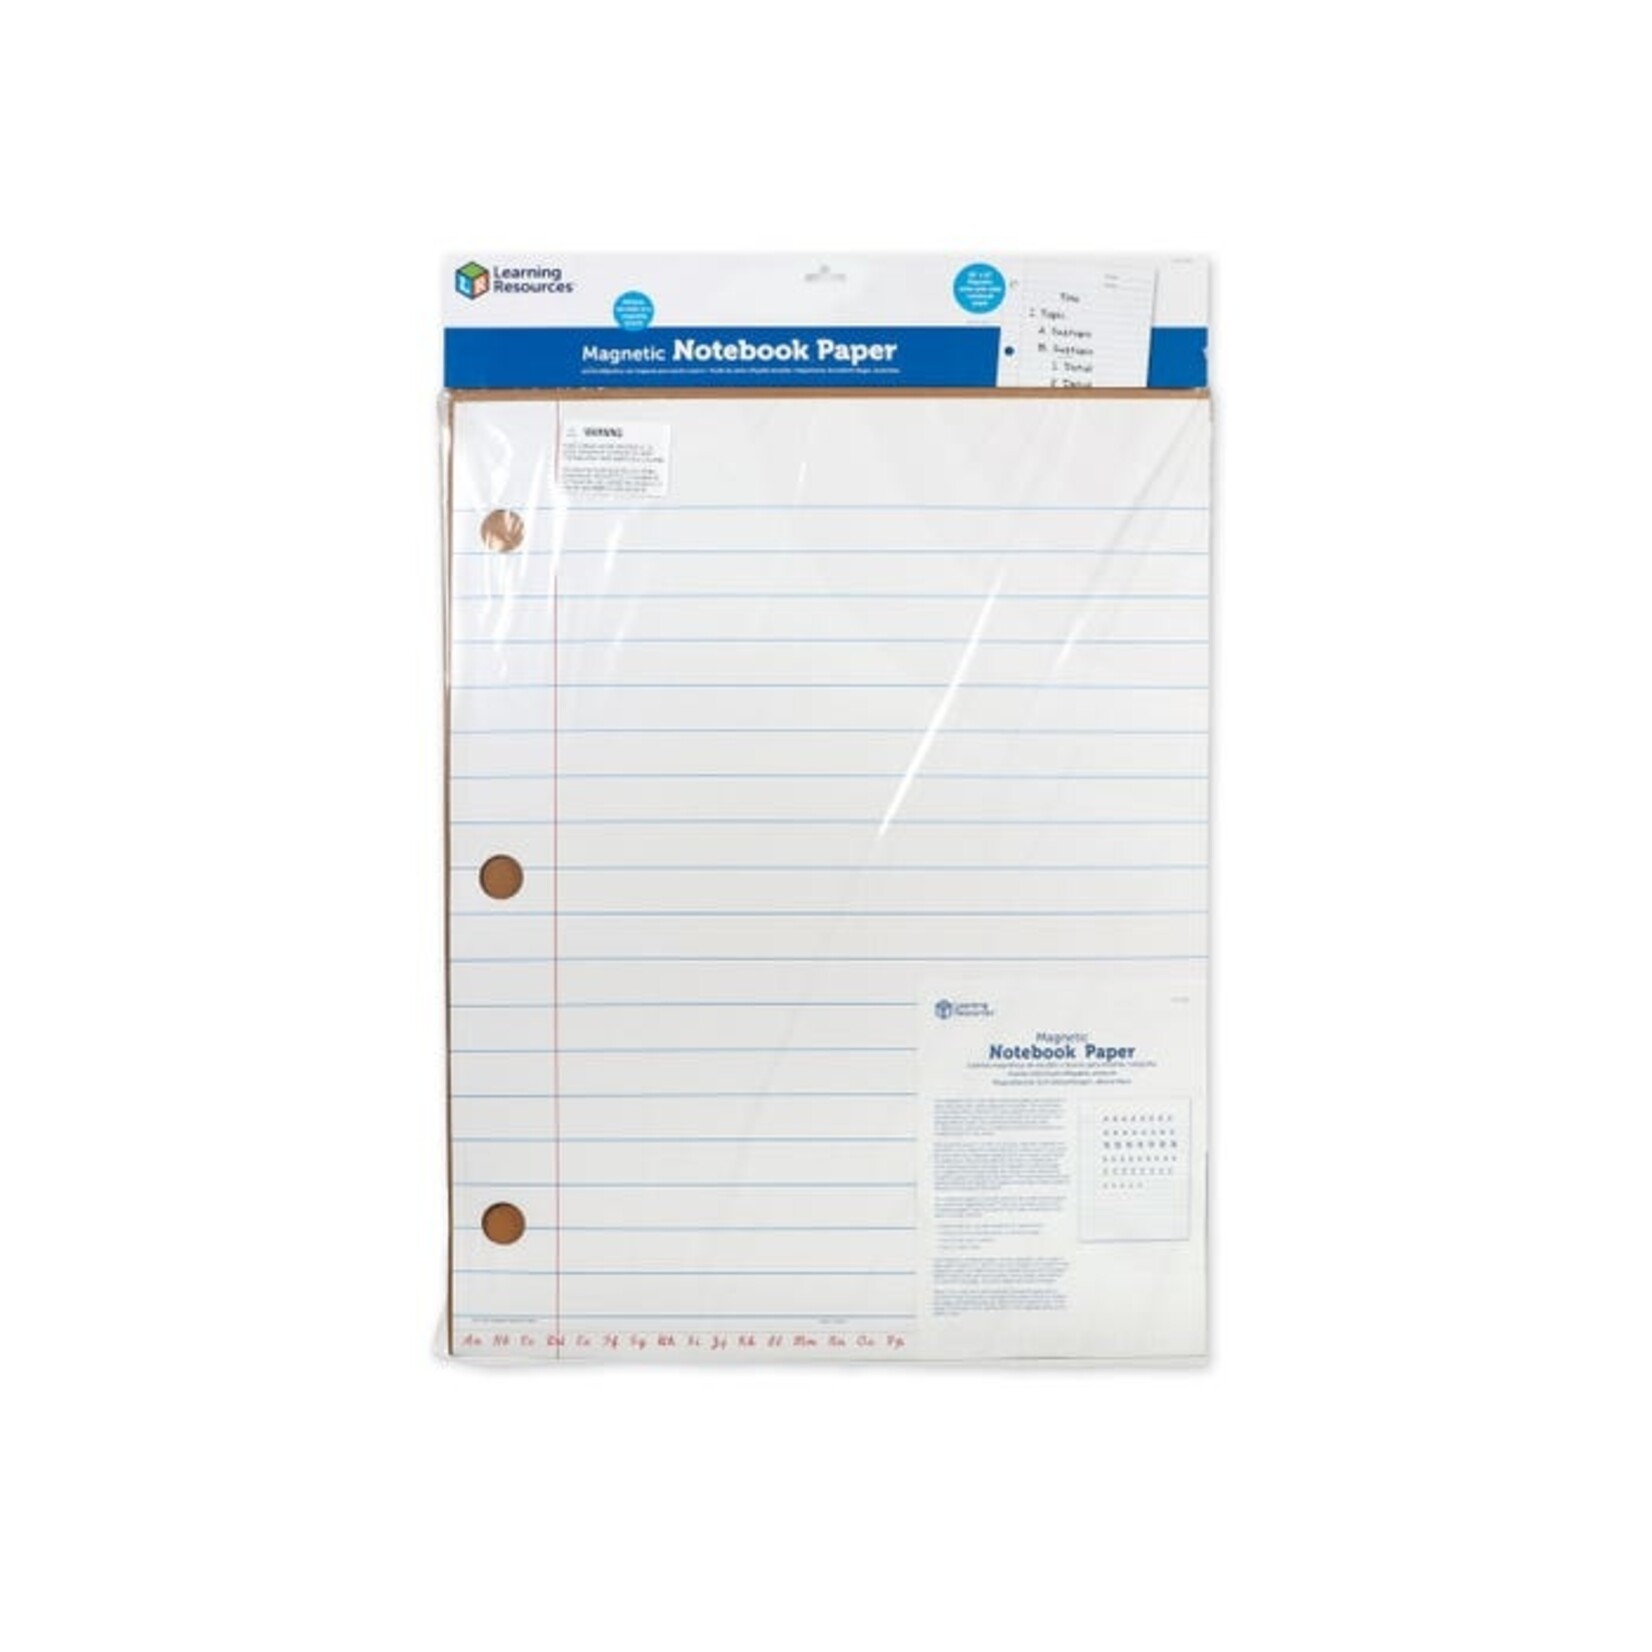 LEARNING RESOURCES INC CHT MAG NOTEBOOK PAPER